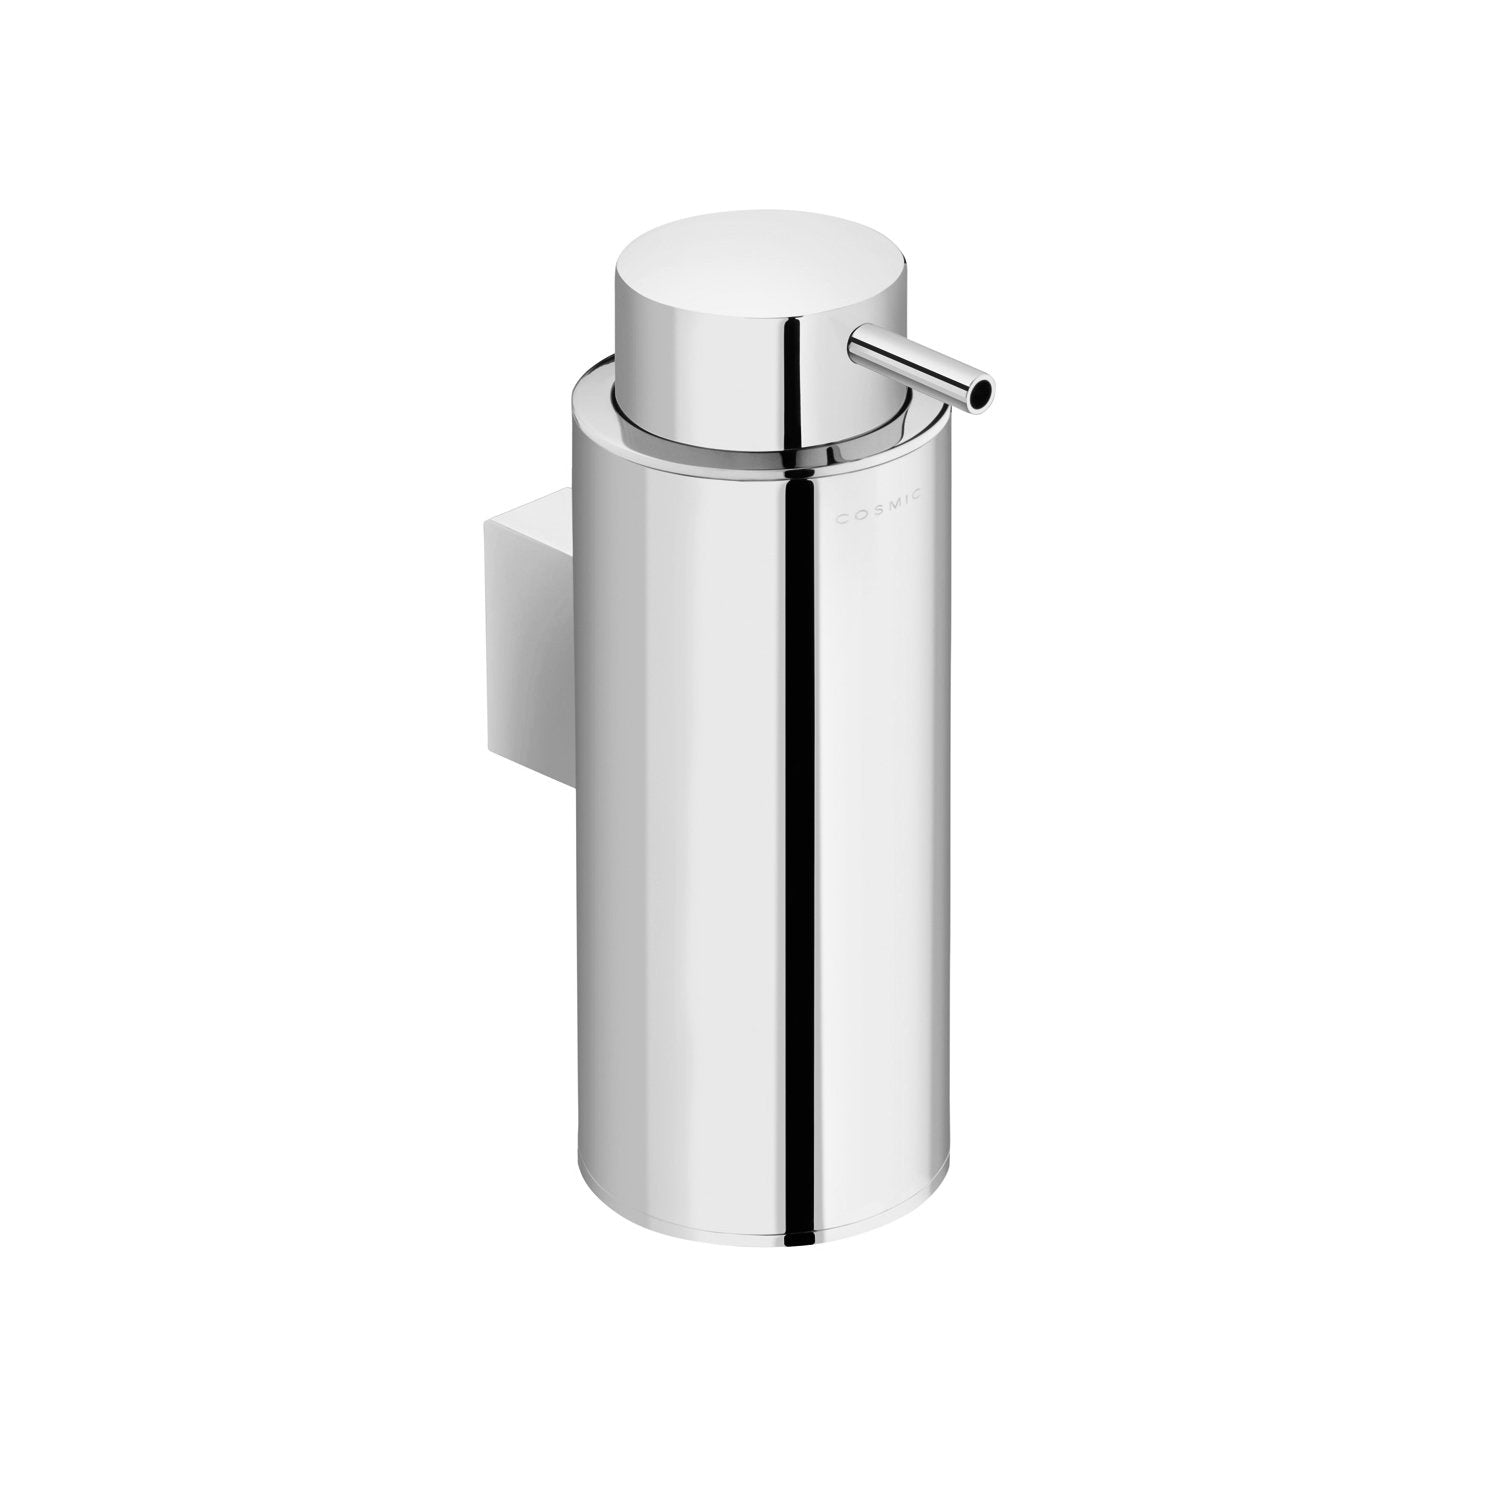 COSMIC Project Soap Dispenser, Wall Mount, Stainless Steel Body, Chrome Finish, 2-9/16 x 6-1/2 x 4-5/16 Inches (2510105)